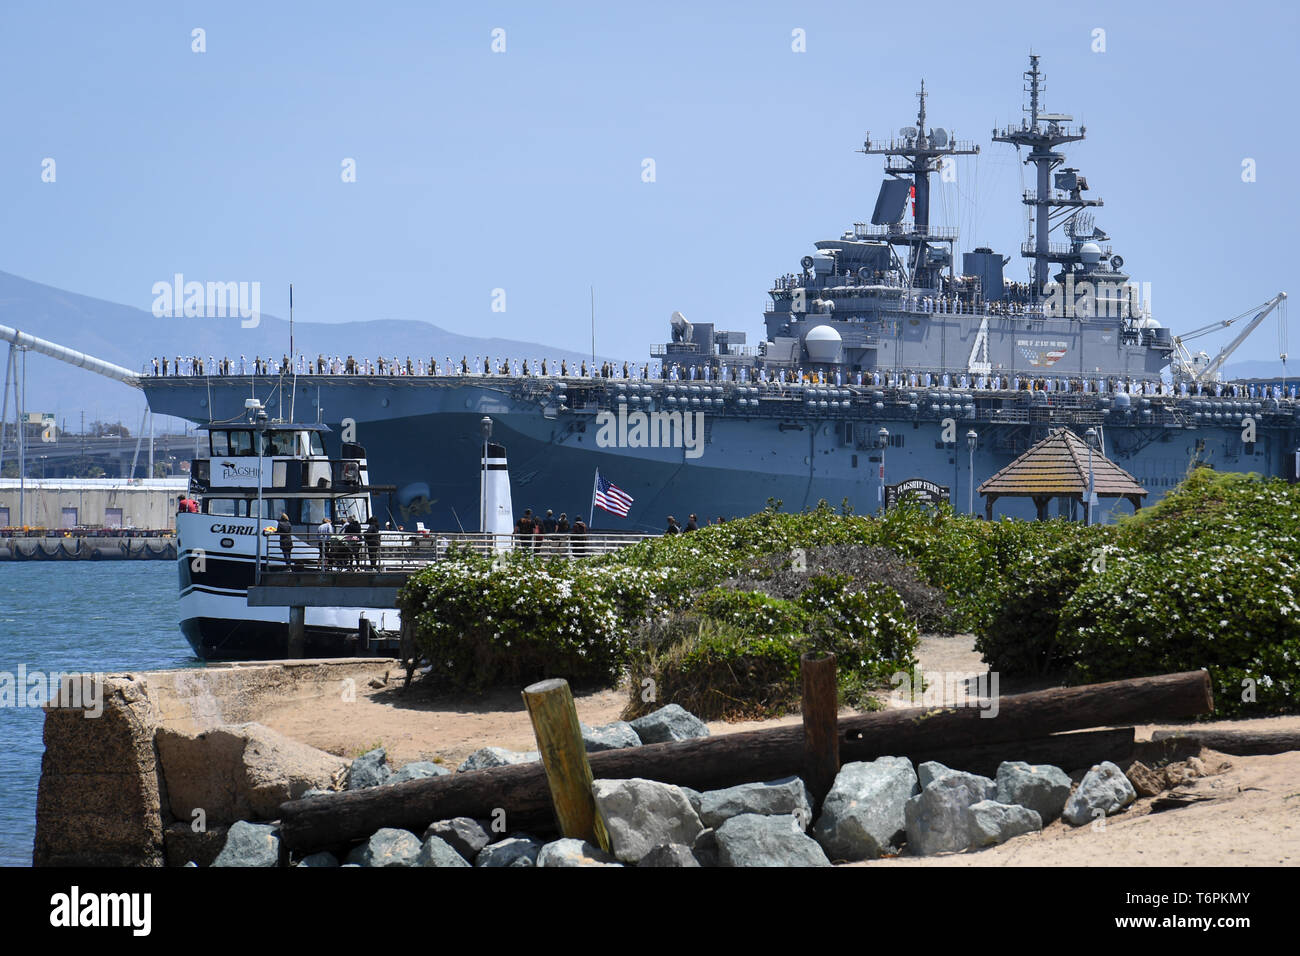 190501-N-SB299-1010    SAN DIEGO (May 1, 2019) – Sailors and Marines aboard the amphibious assault ship USS Boxer (LHD 4) depart Naval Base San Diego, May 1, for a regularly-scheduled deployment. Boxer is the flagship of the Boxer ARG, which also includes the amphibious transport dock USS John P Murtha (LPD 26) and the amphibious dock landing ship USS Harpers Ferry (LSD 49), as well as the 11th Marine Expeditionary Unit (MEU). The ARG/MEU team will conduct maritime security operations, crisis response operations, theater security cooperation and forward naval presence operations while deployed Stock Photo